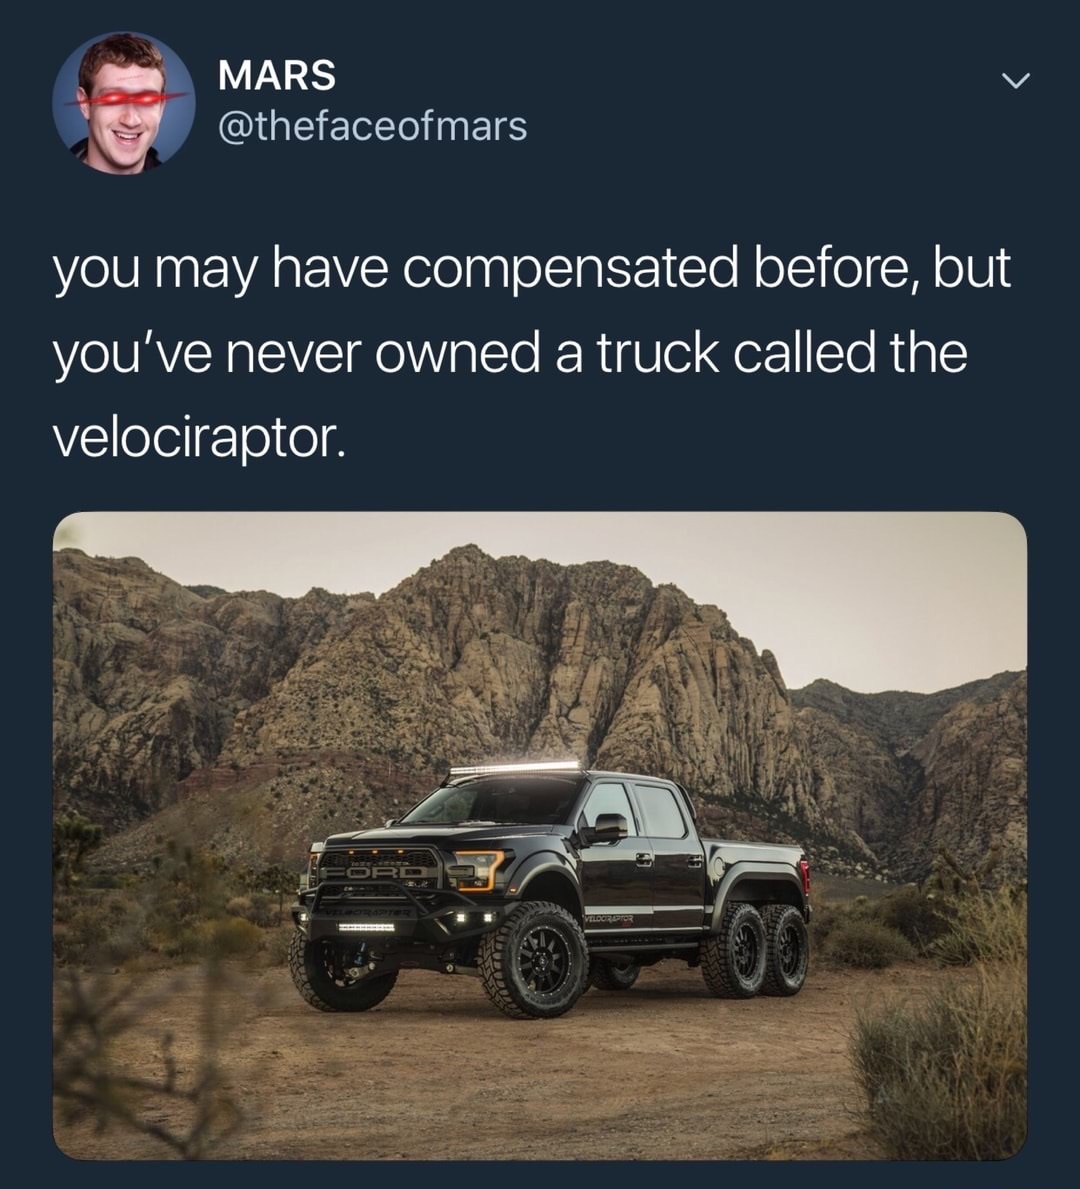 memes - bonnie springs ranch - Mars you may have compensated before, but you've never owned a truck called the velociraptor. Bre